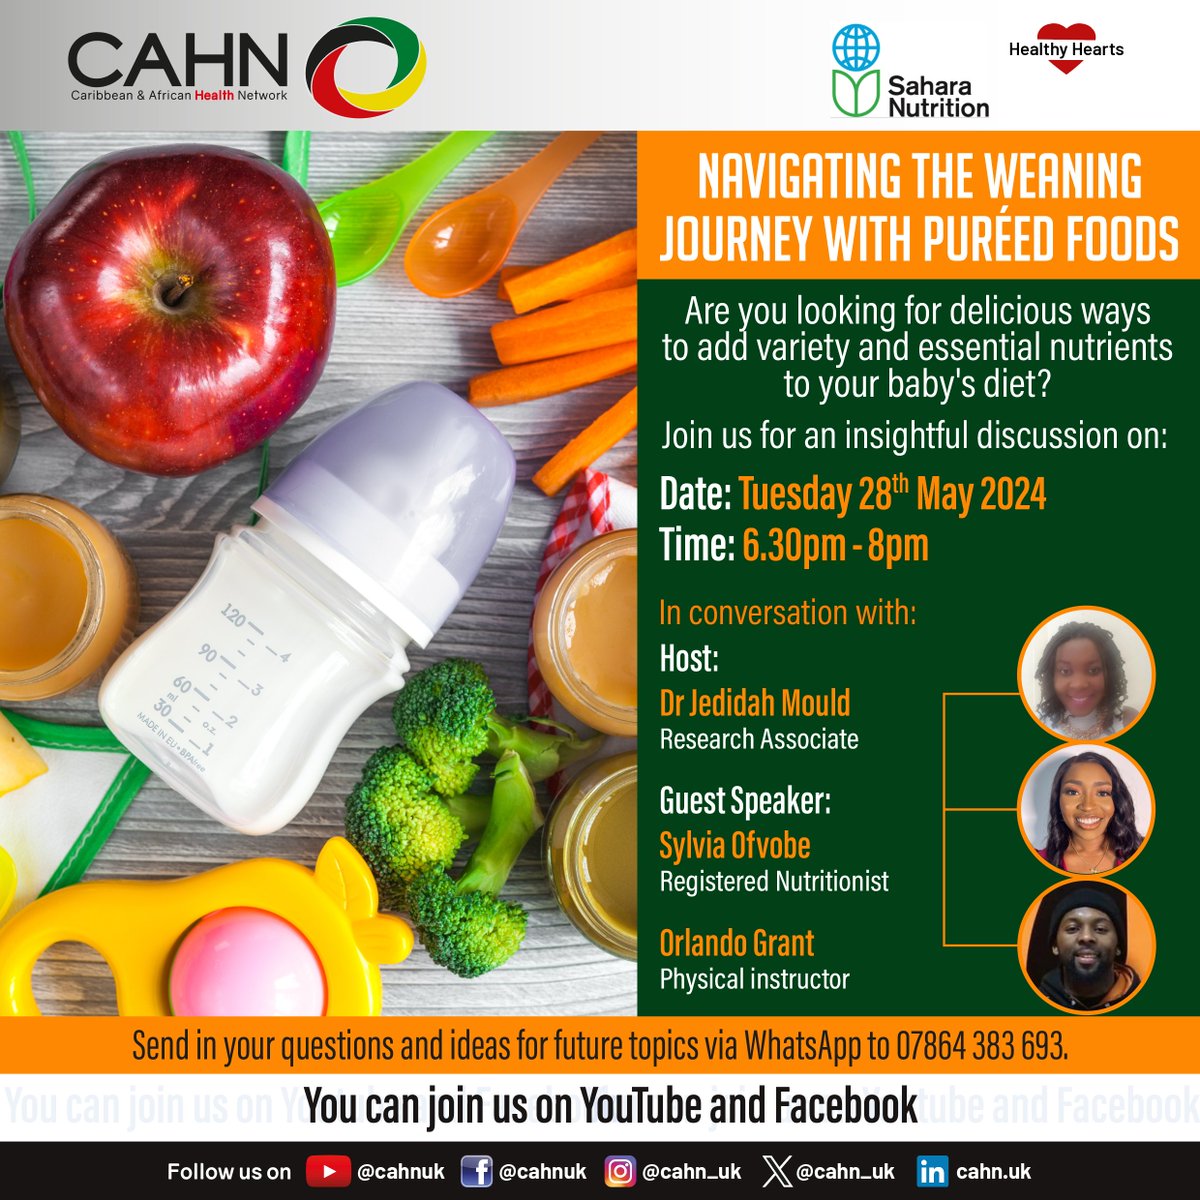 Recently become a parent or grandparent? Let us help you along the process of weaning your young one. We’ll be exploring how to do this using puréed foods at #HealthyHearts on Tues. 
Sign up today!
portal.cahn.org.uk/healthyhearts
And get moving with our live exercise session, too!